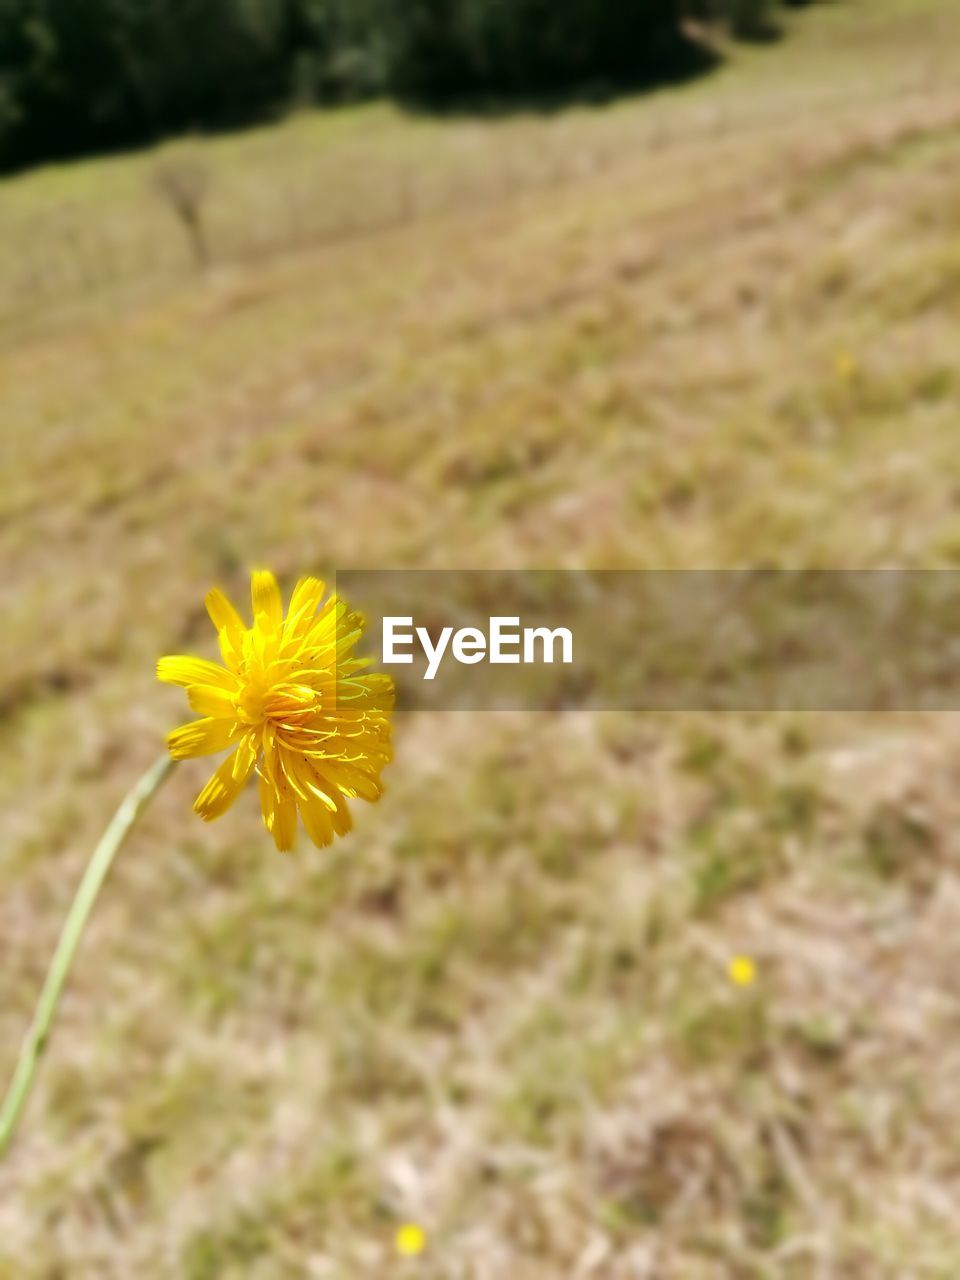 CLOSE-UP OF YELLOW FLOWERS BLOOMING IN FIELD